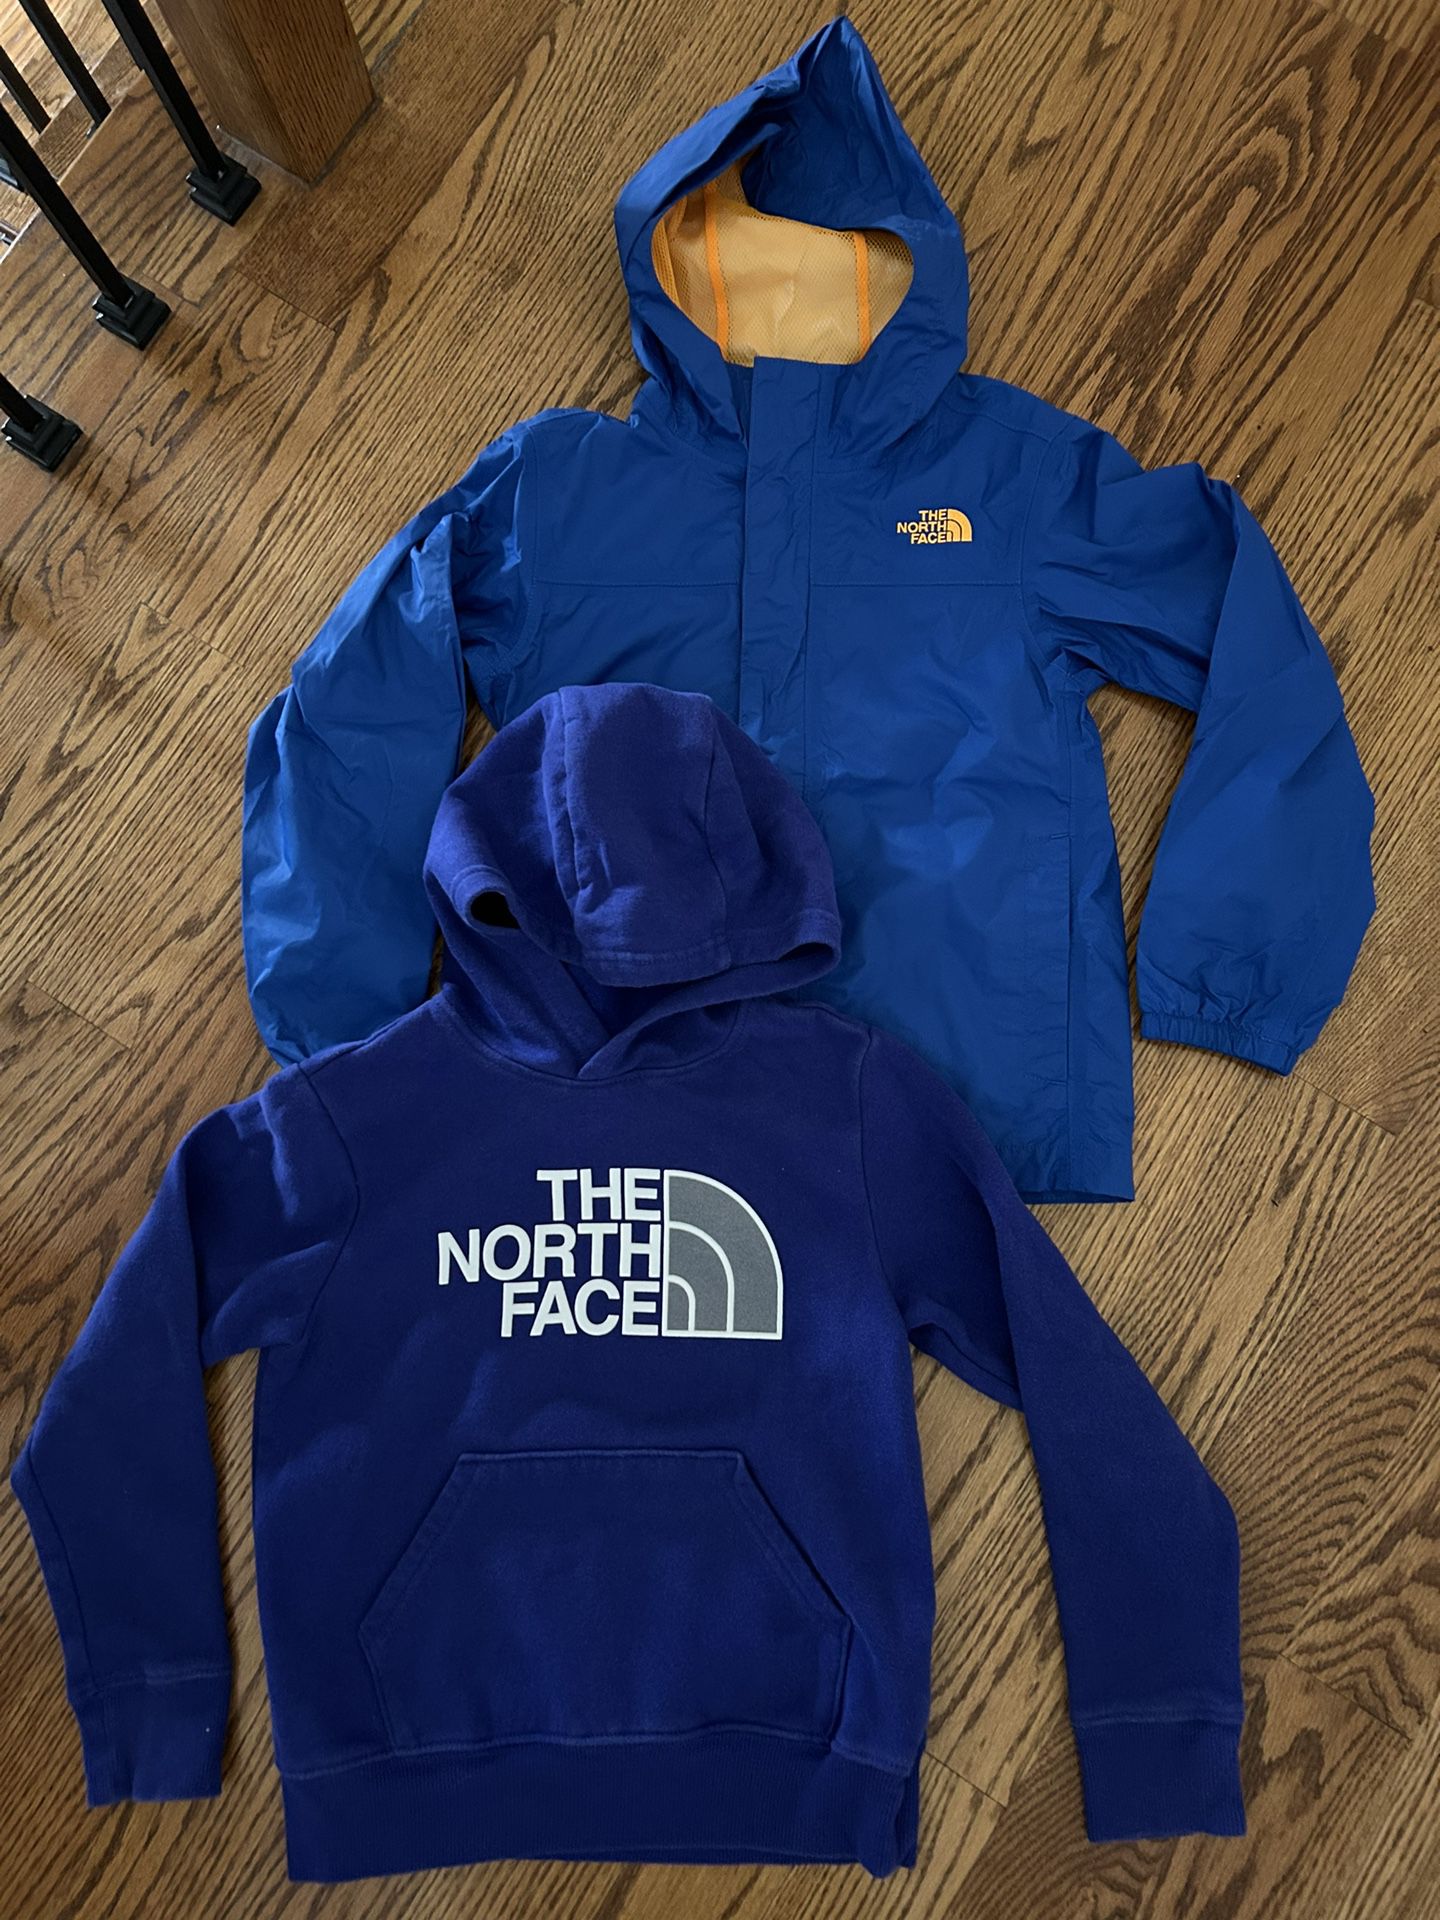 The North Face Kids Jacket And Hoodie